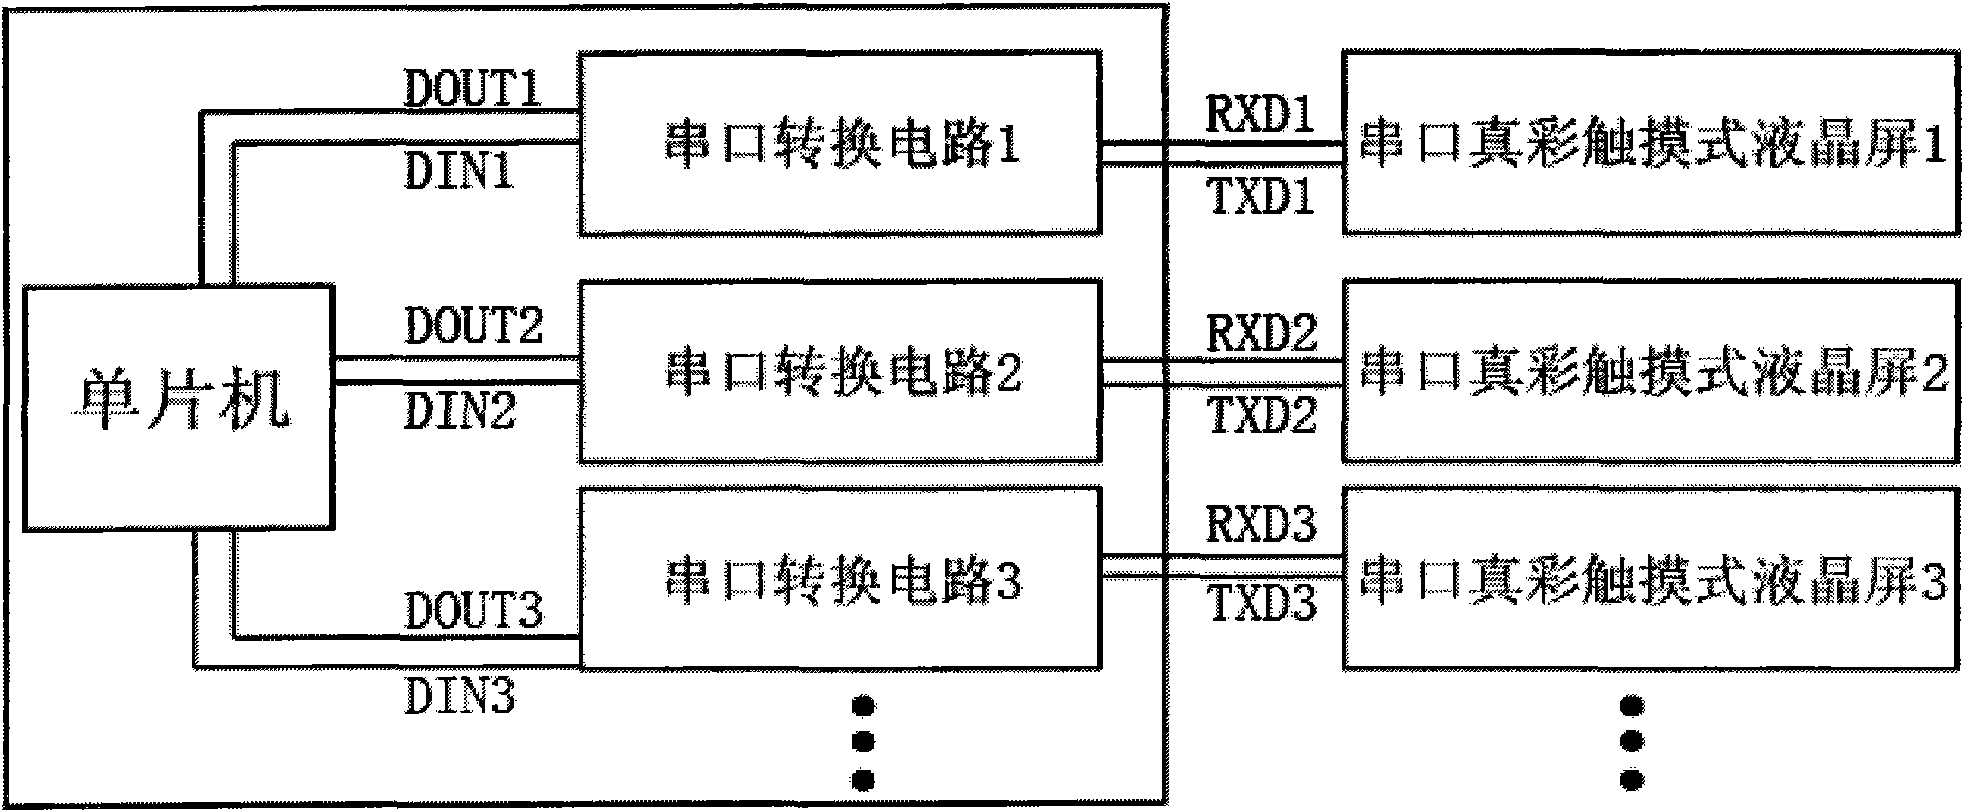 Multi-screen man-machine interaction control device for medical X ray machine